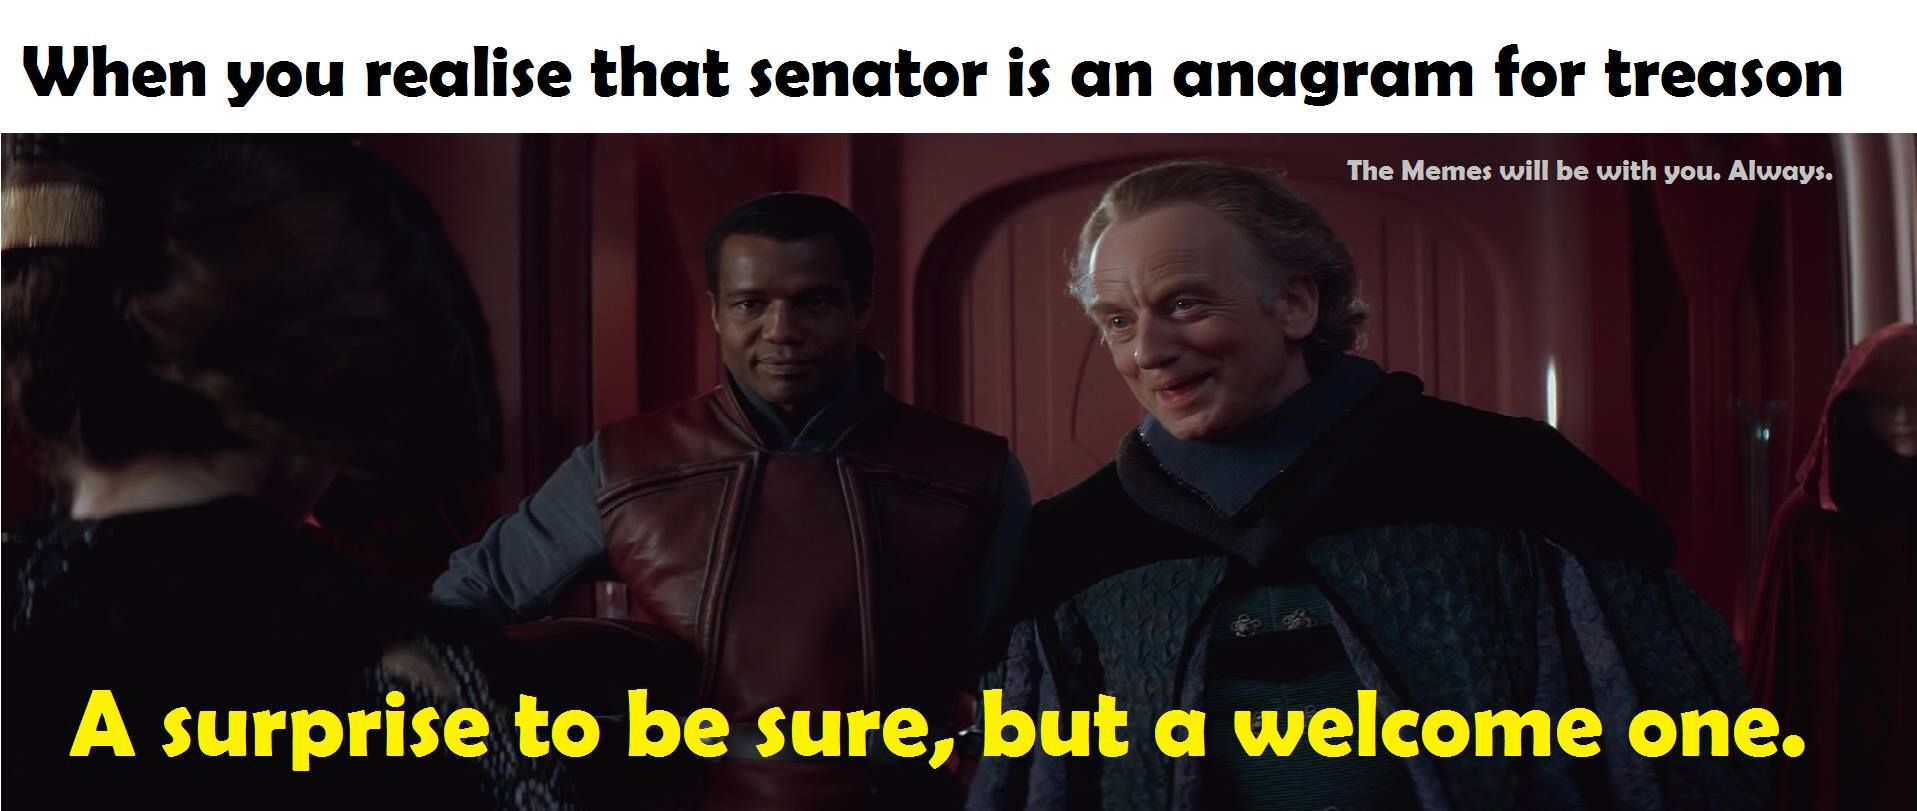 I guess it is treason then